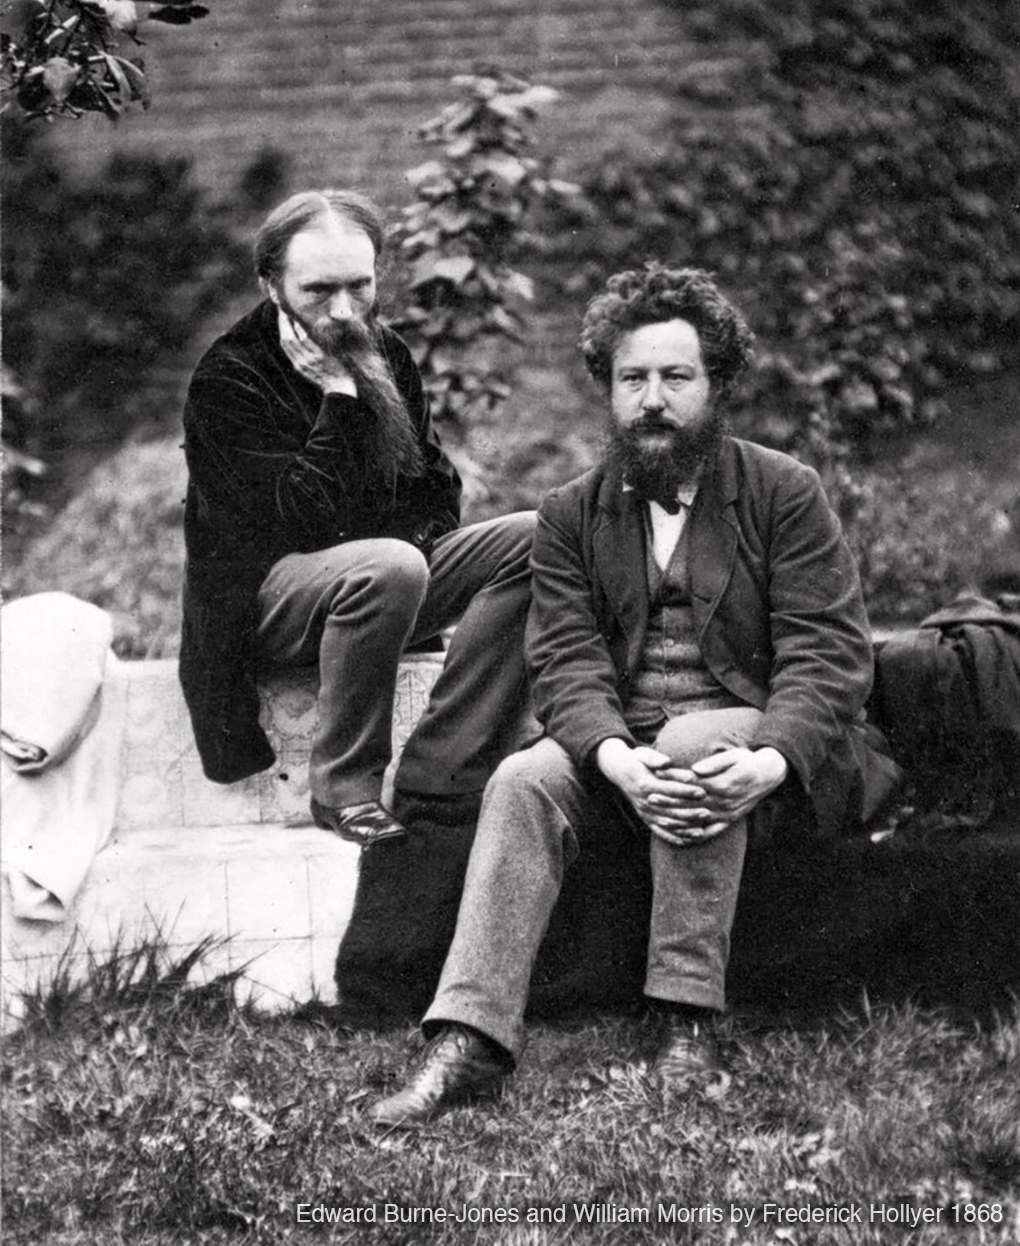 Edward Burne-Jones and William Morris, photograph by Frederick Hollyer in 1868.